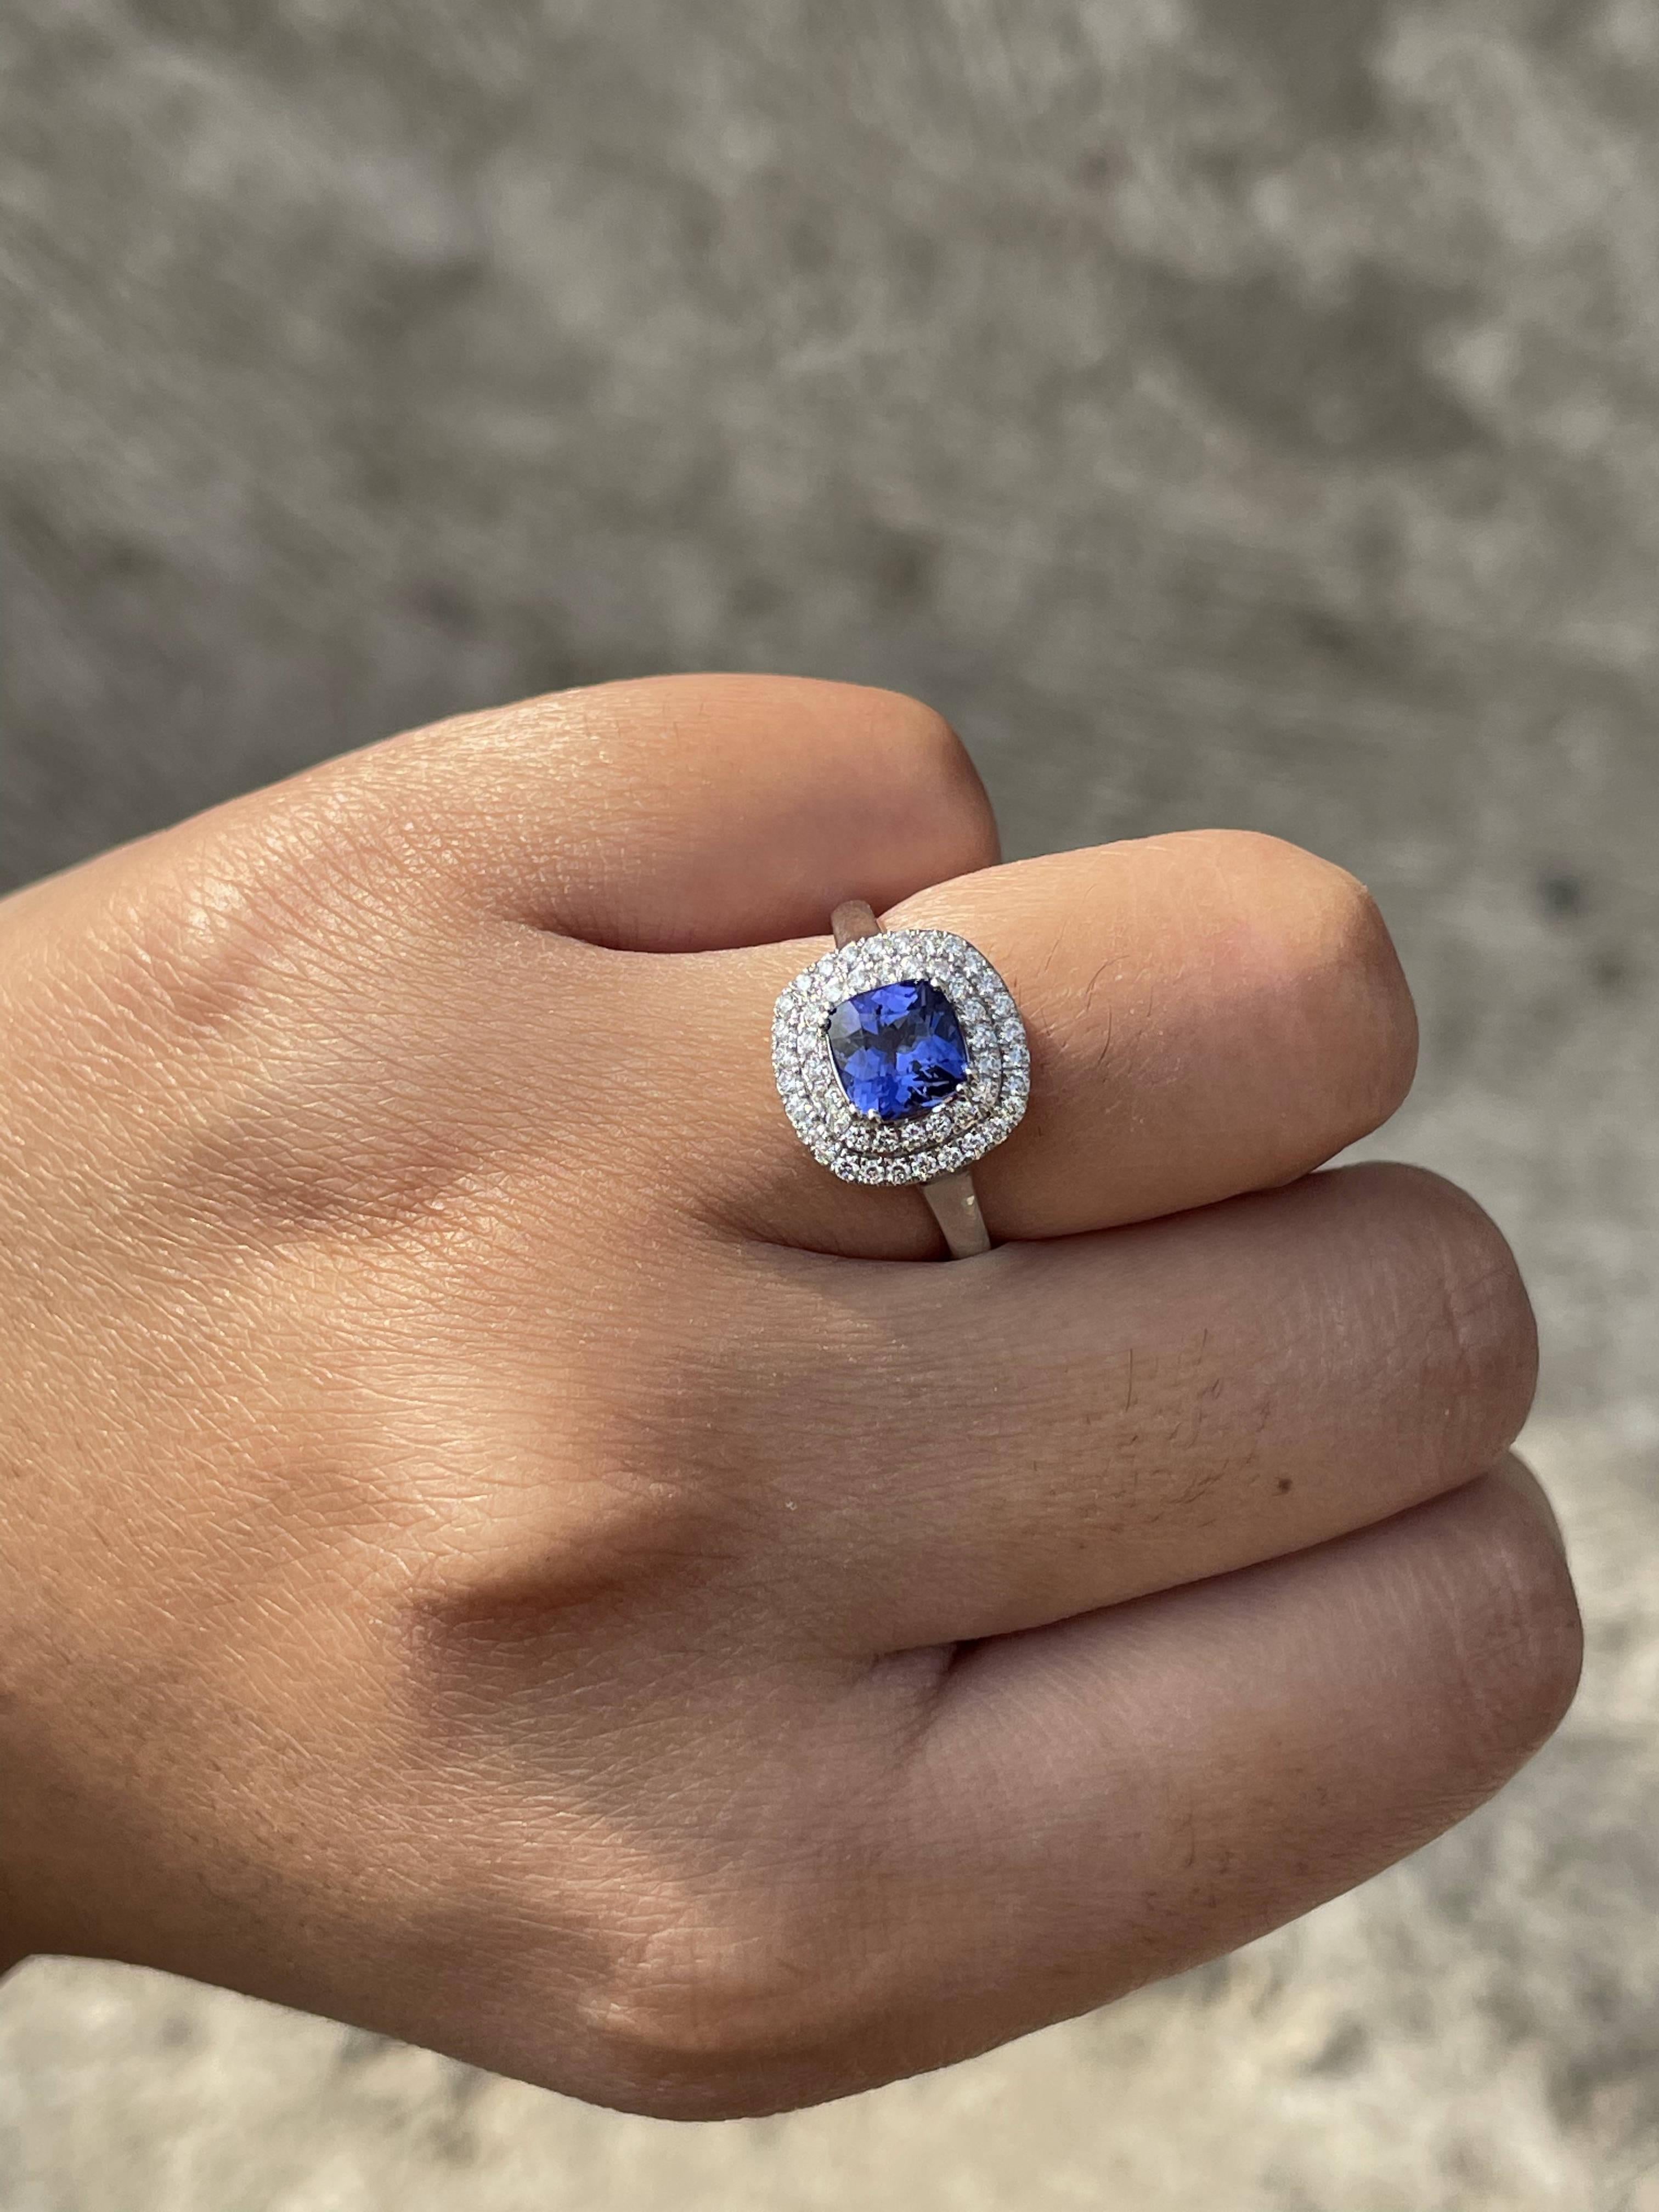 For Sale:  18k Solid White Gold Cushion Cut 1.2 Ct Tanzanite Diamond Ring for Women 9